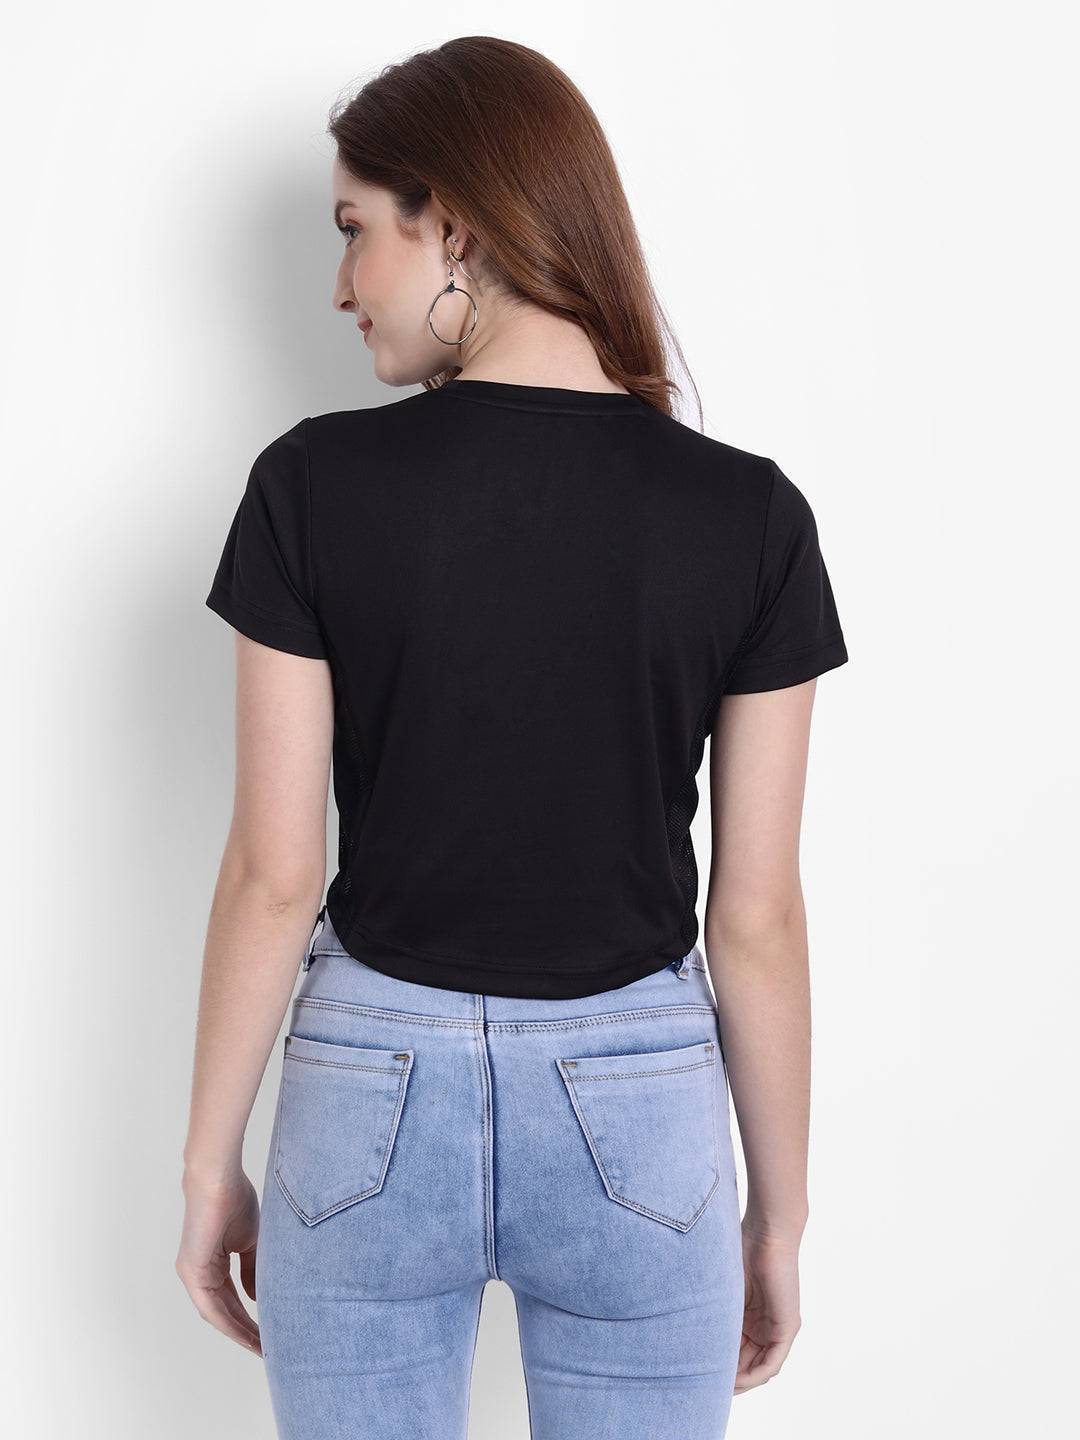 LONG BACK CROP TOP BLACK AND MILITARY RWW2037